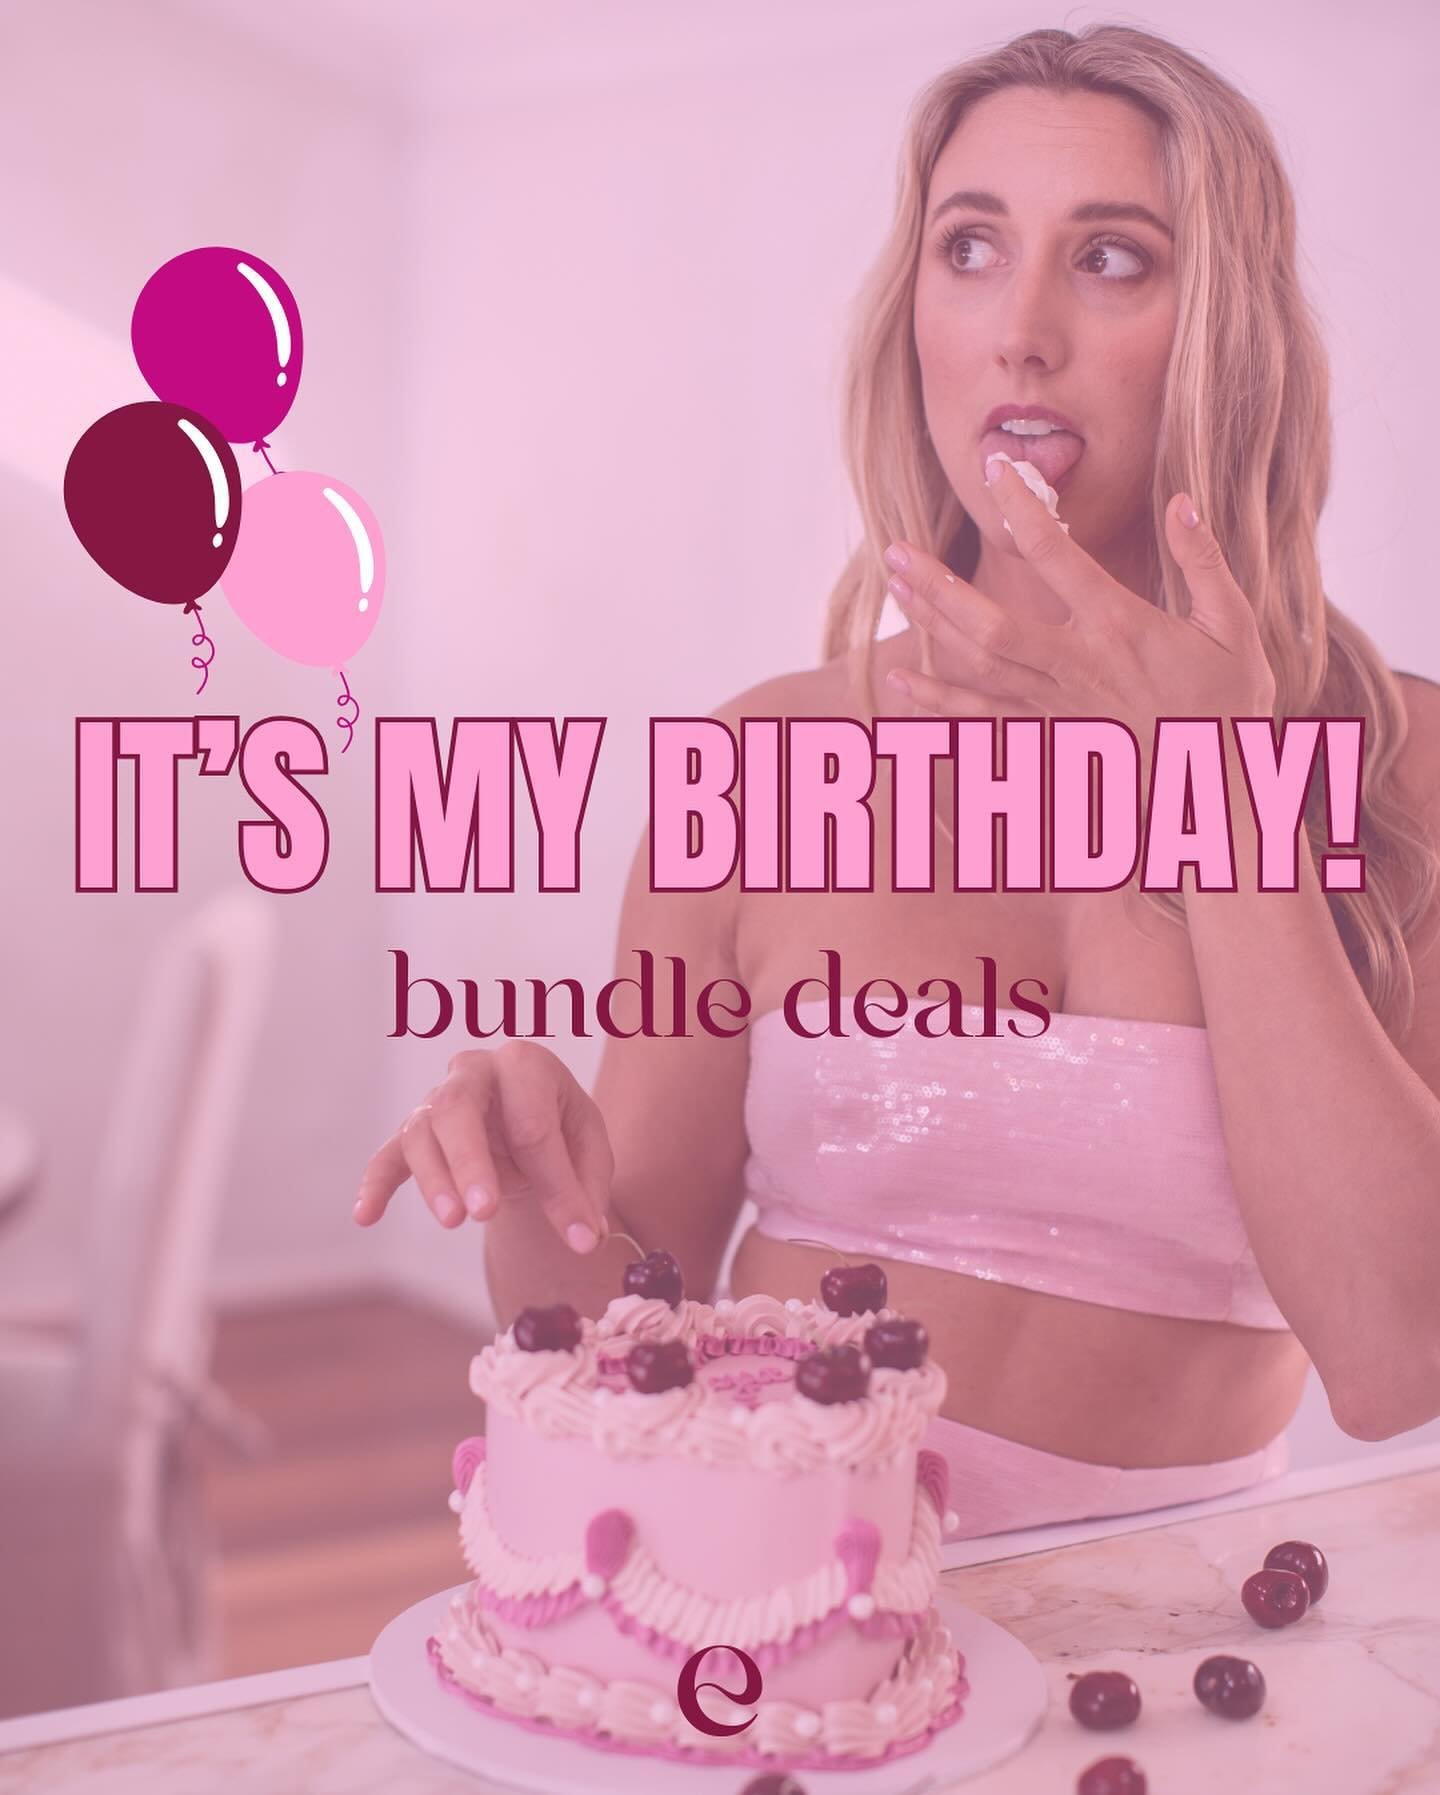 Hey honeys, it&rsquo;s my birthdayyyyy 🎂 and to celebrate, I&rsquo;m bringing back some of my popular bundles for you 🩷

You all know I&rsquo;m obsessed with the work that I do and nothing would make me happier today than knowing there&rsquo;s peop